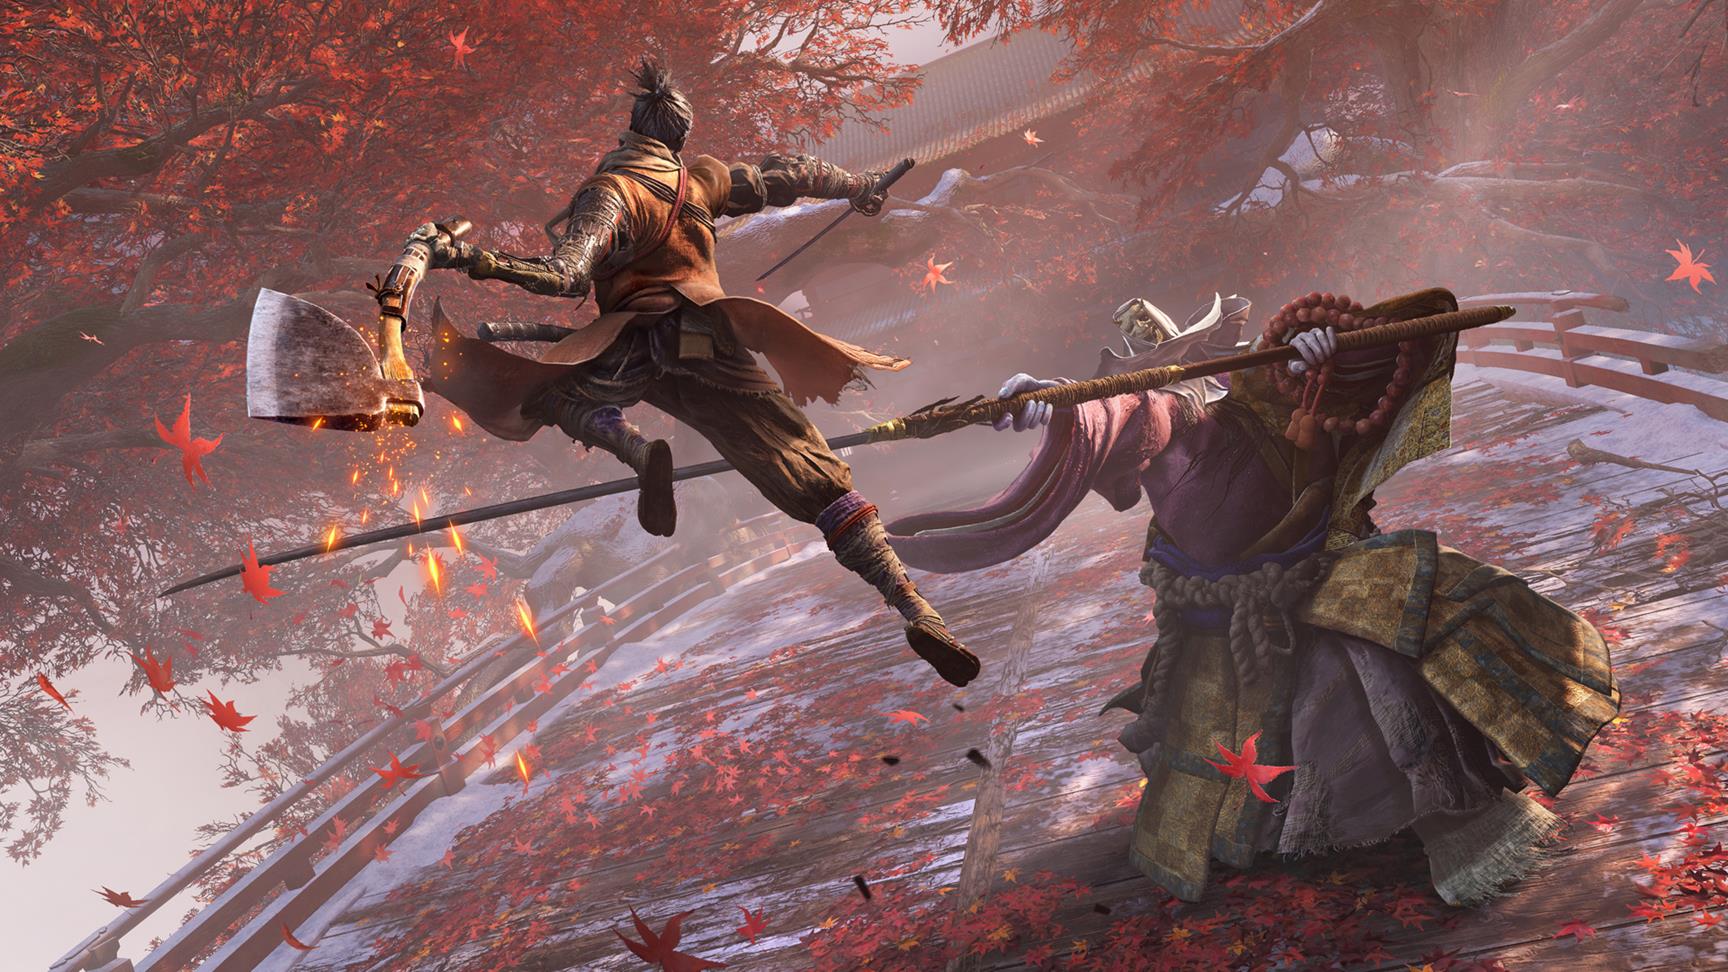 Image for Sekiro: Shadows Die Twice is Steam's biggest launch in 2019, but numbers are slightly behind Dark Souls 3